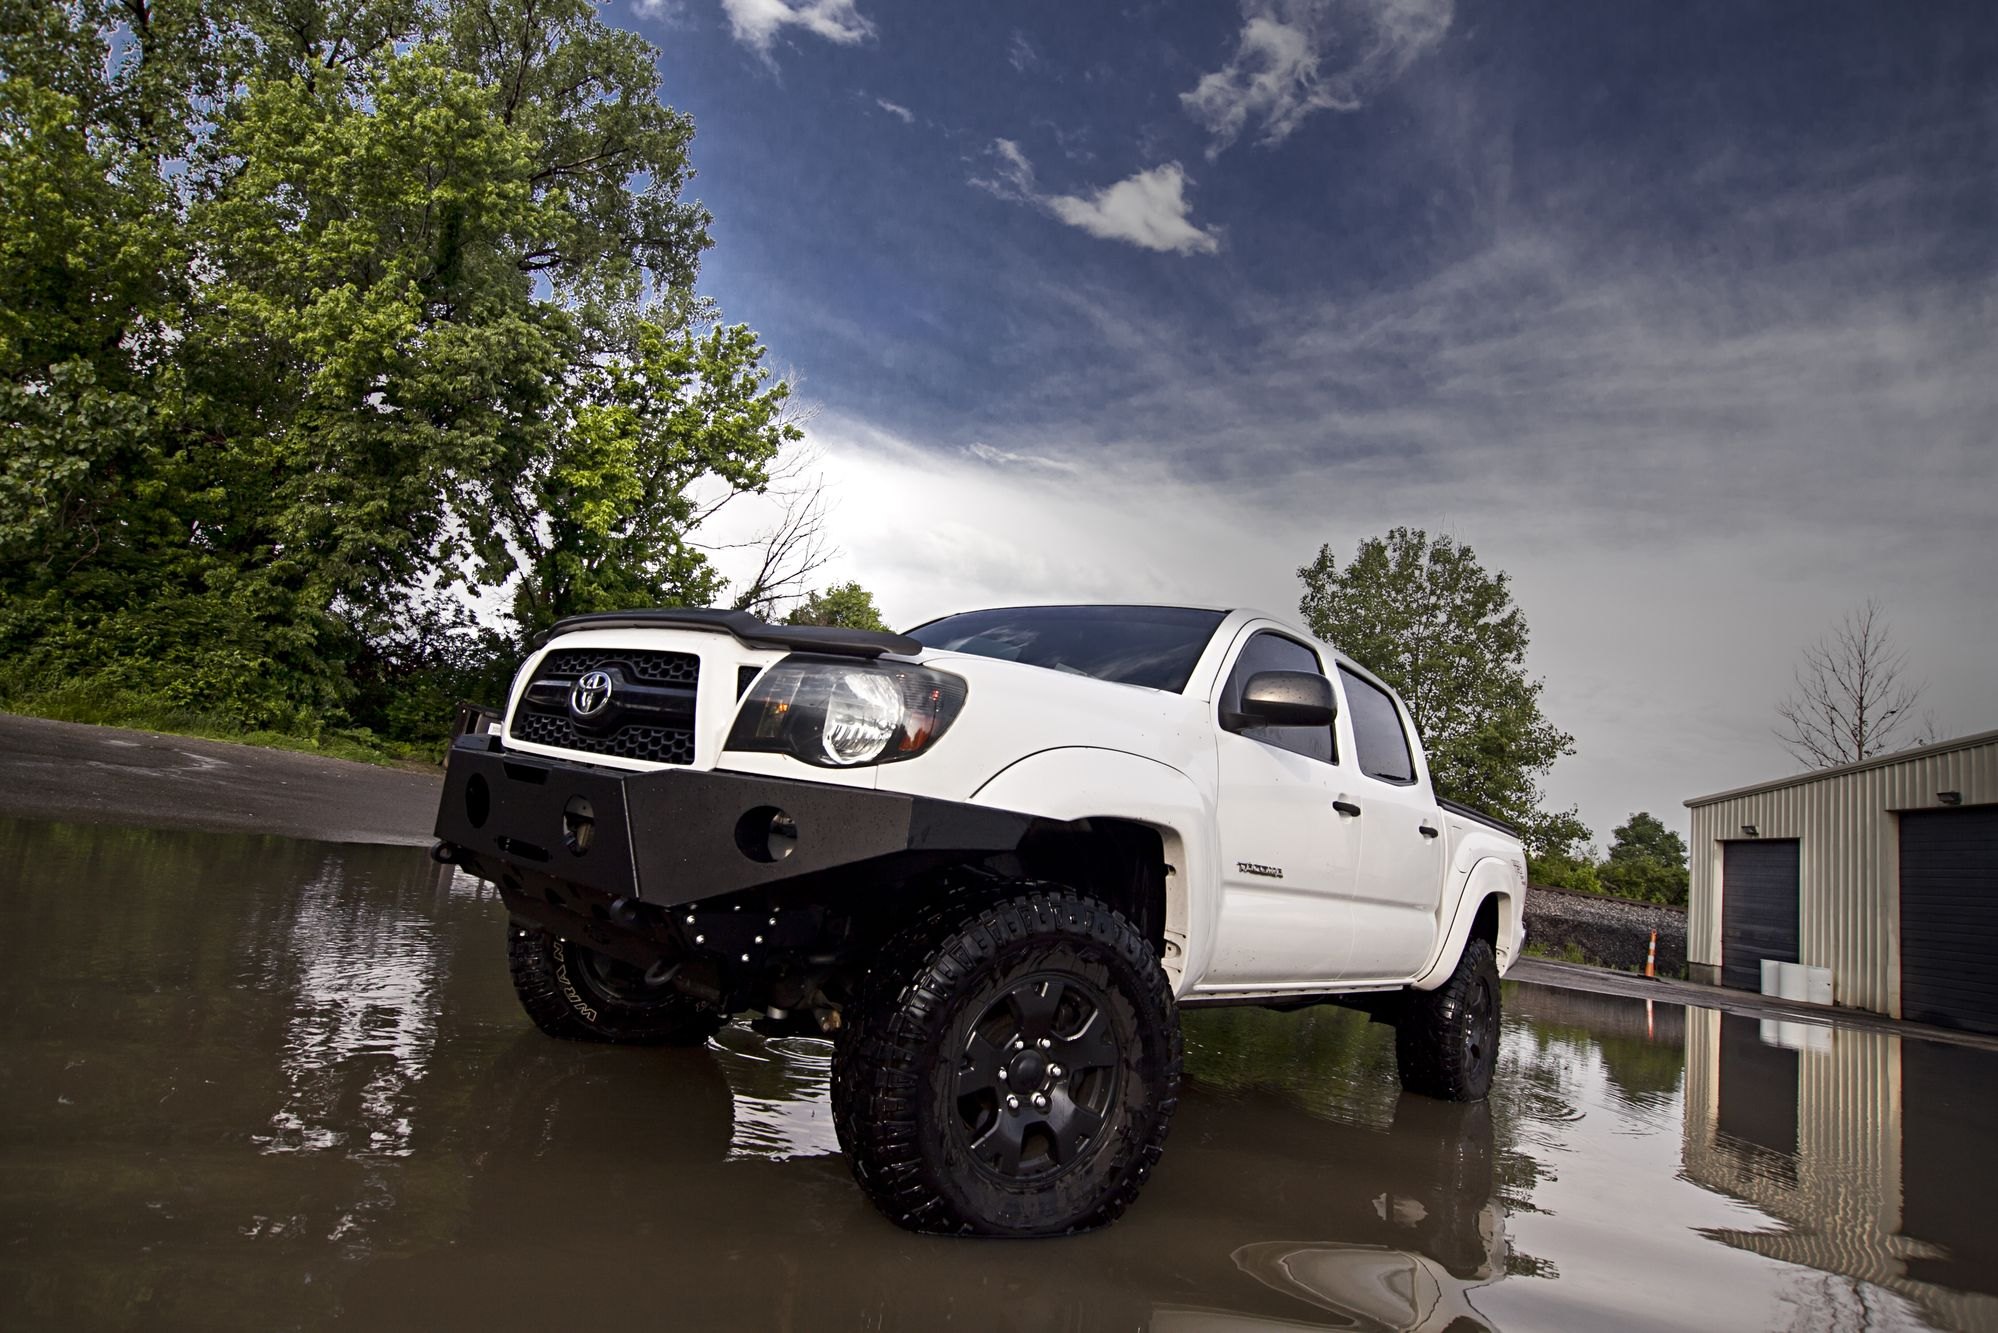 White Toyota Tacoma with Off-Road Front Bumper - Photo by dan kinzie